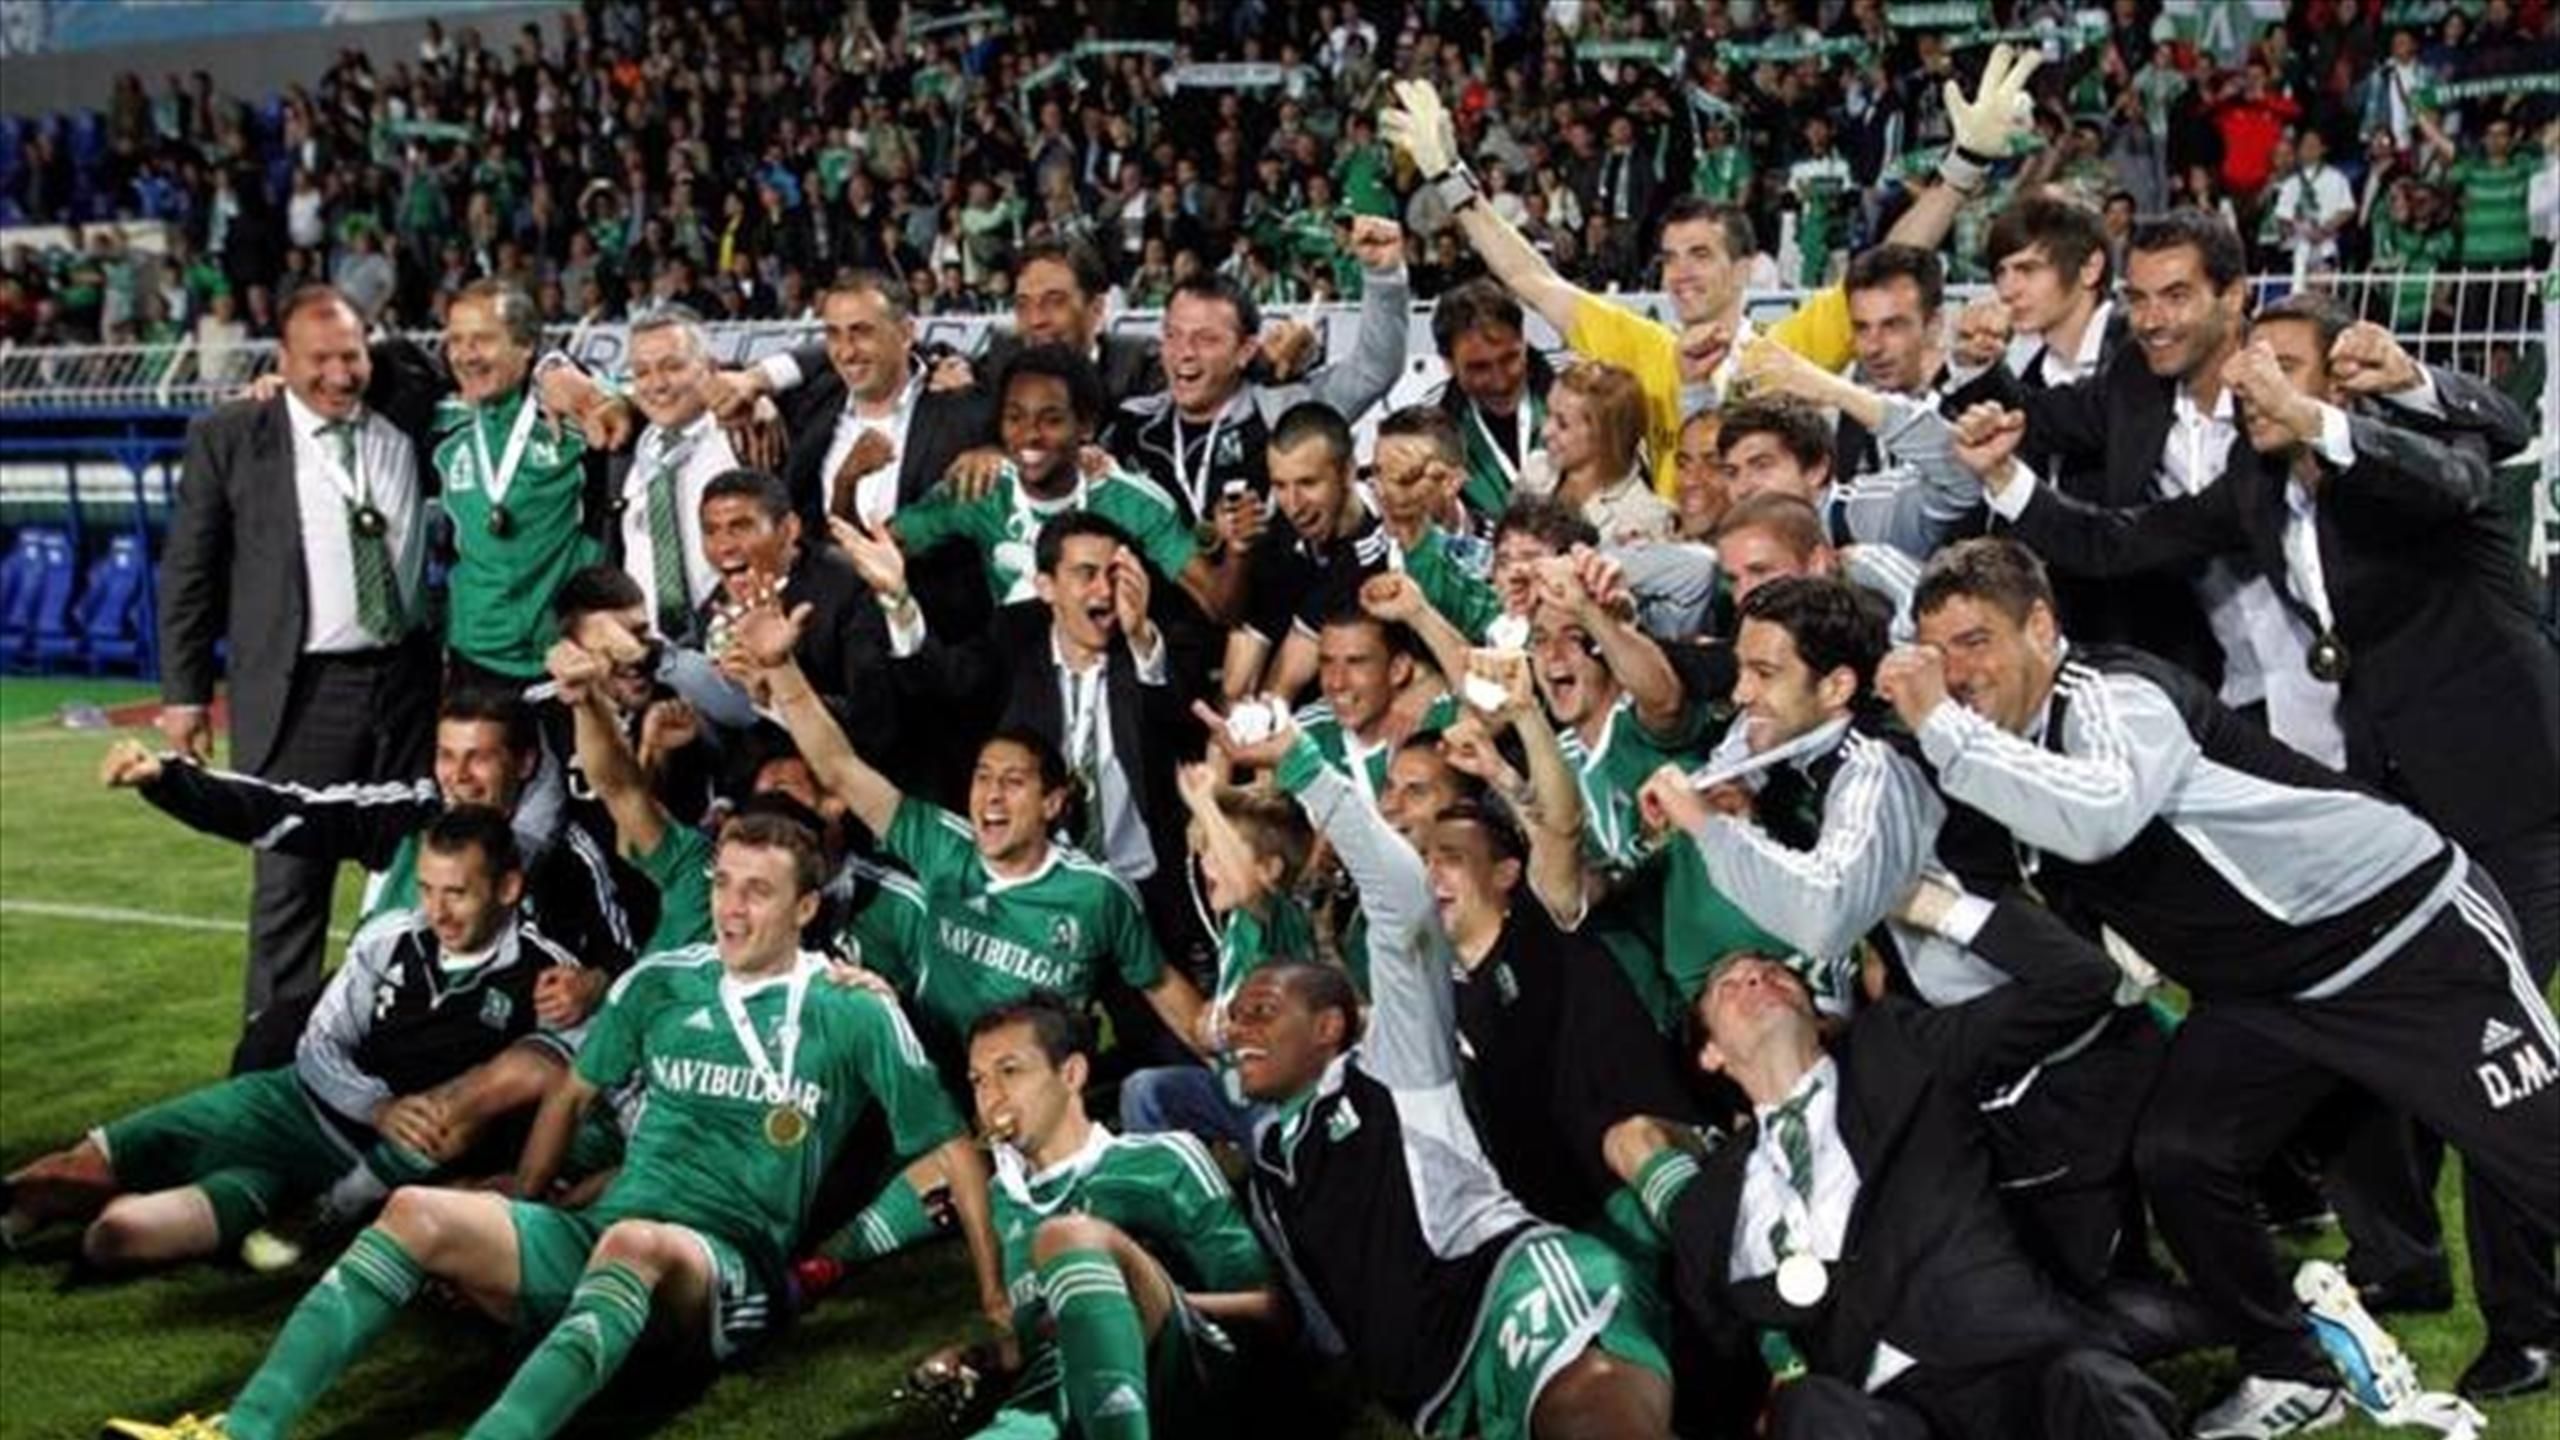 African sextet wins Bulgarian league title with Ludogorets